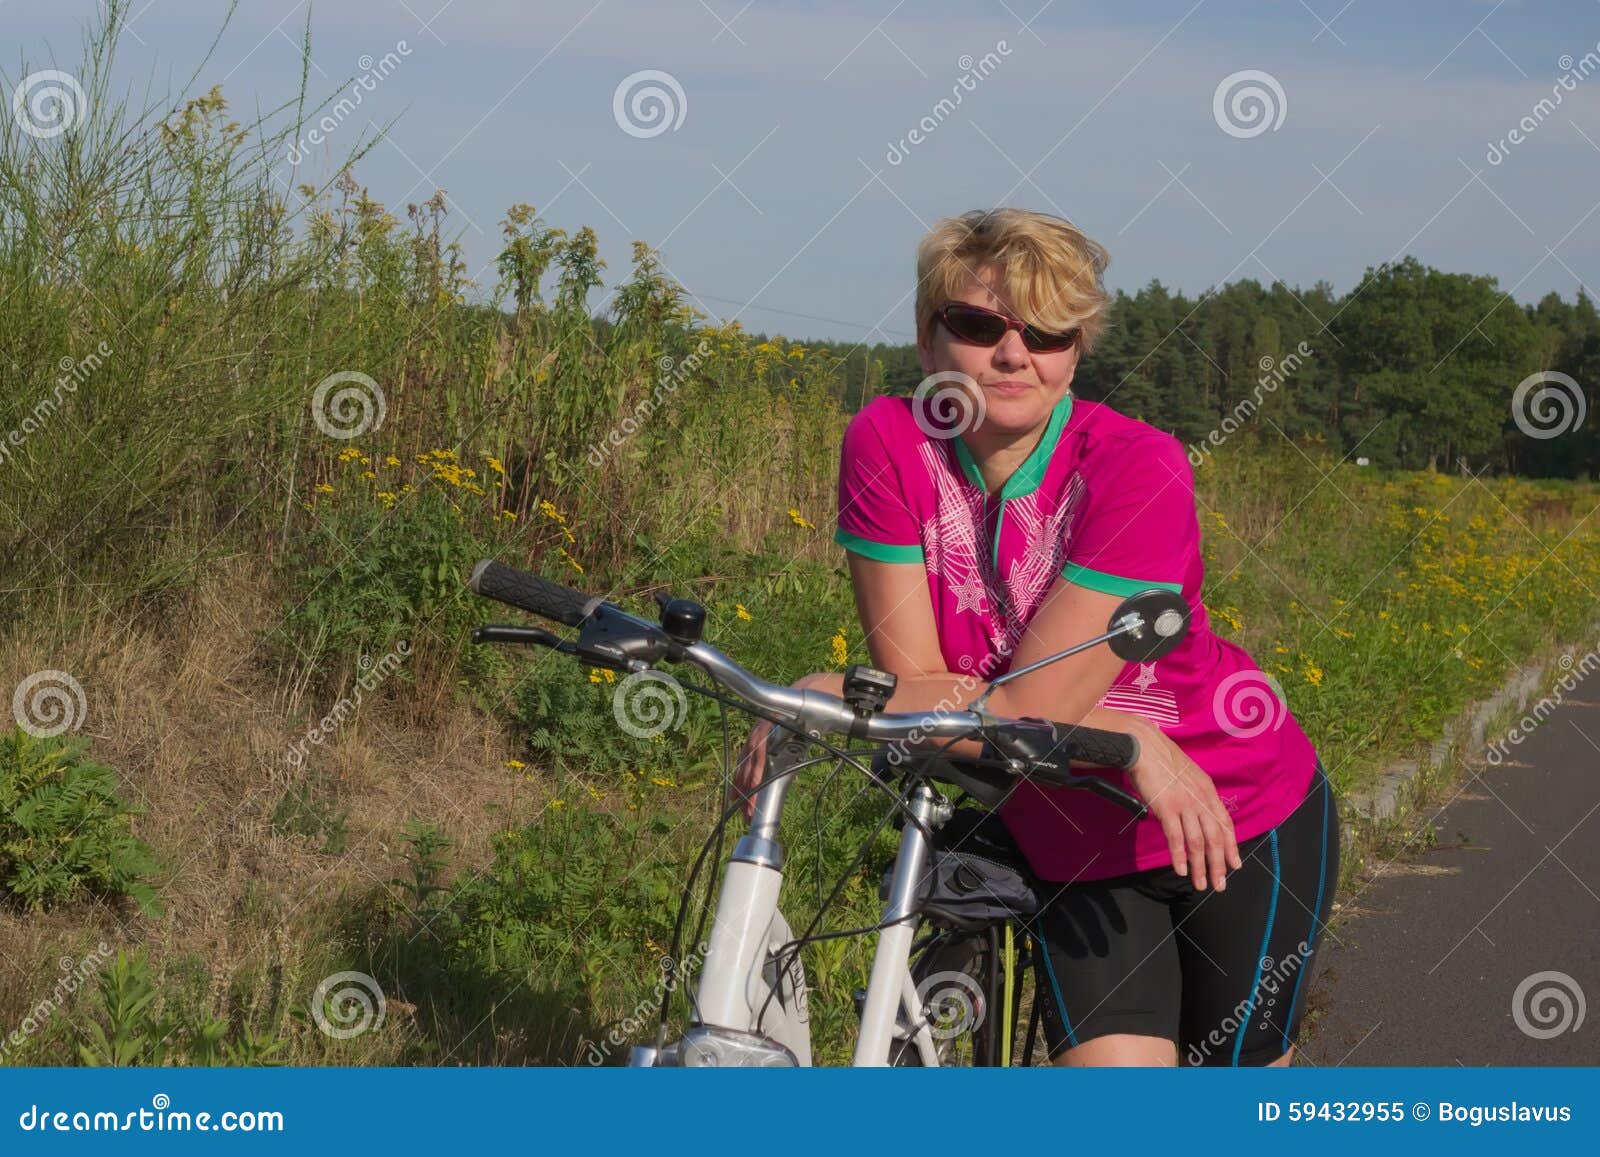 a woman with a bicycle.